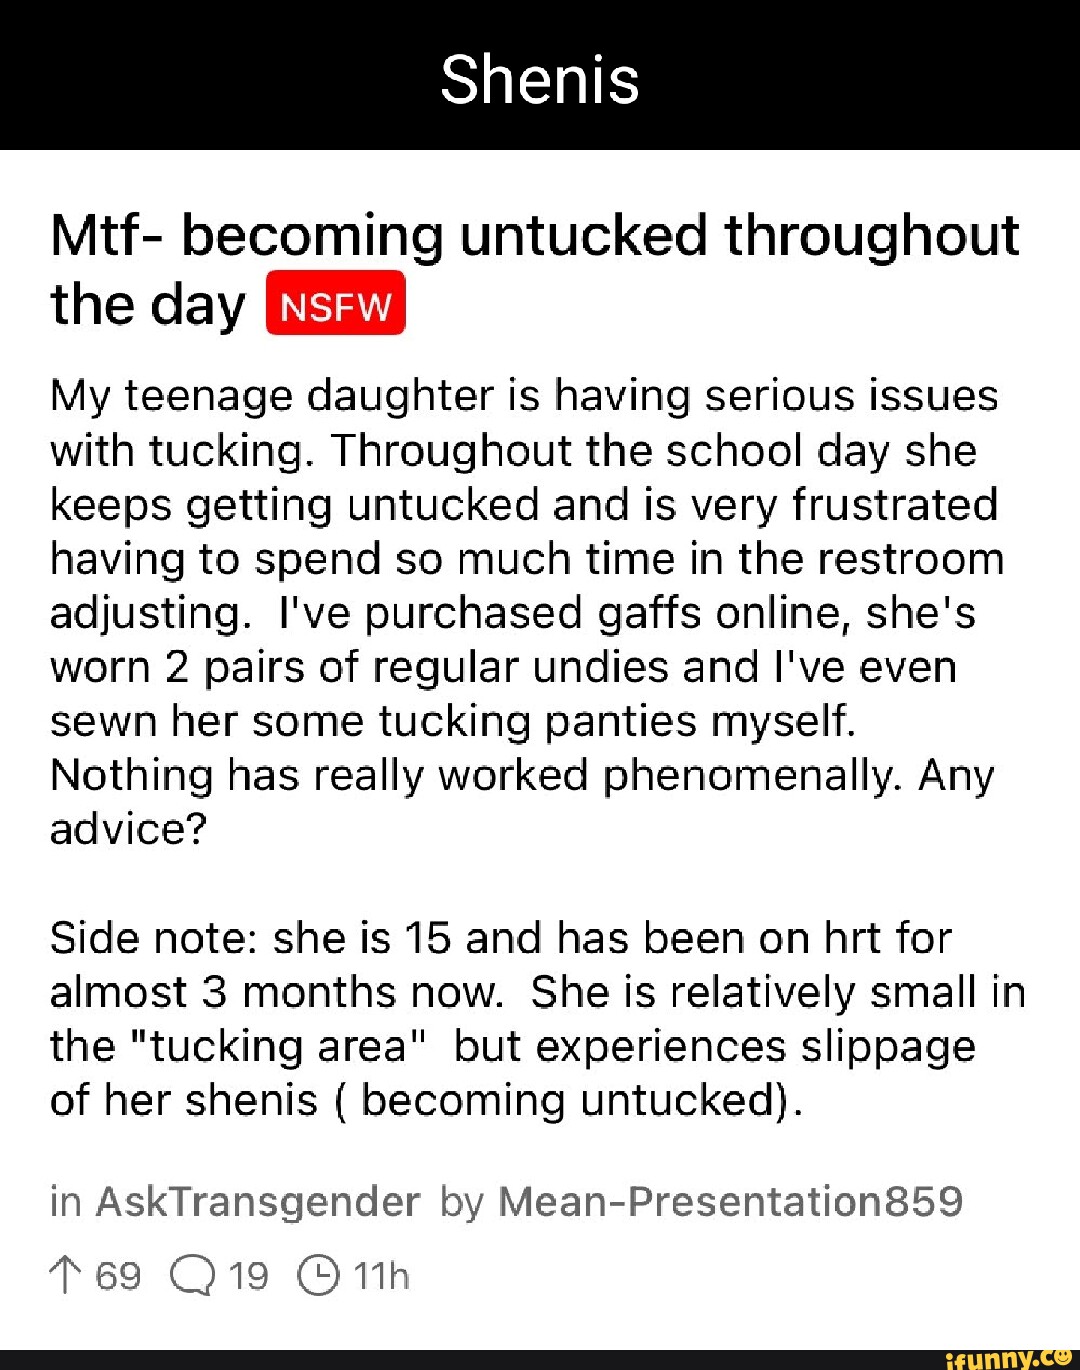 Is Mtf- becoming untucked throughout the day My teenage daughter